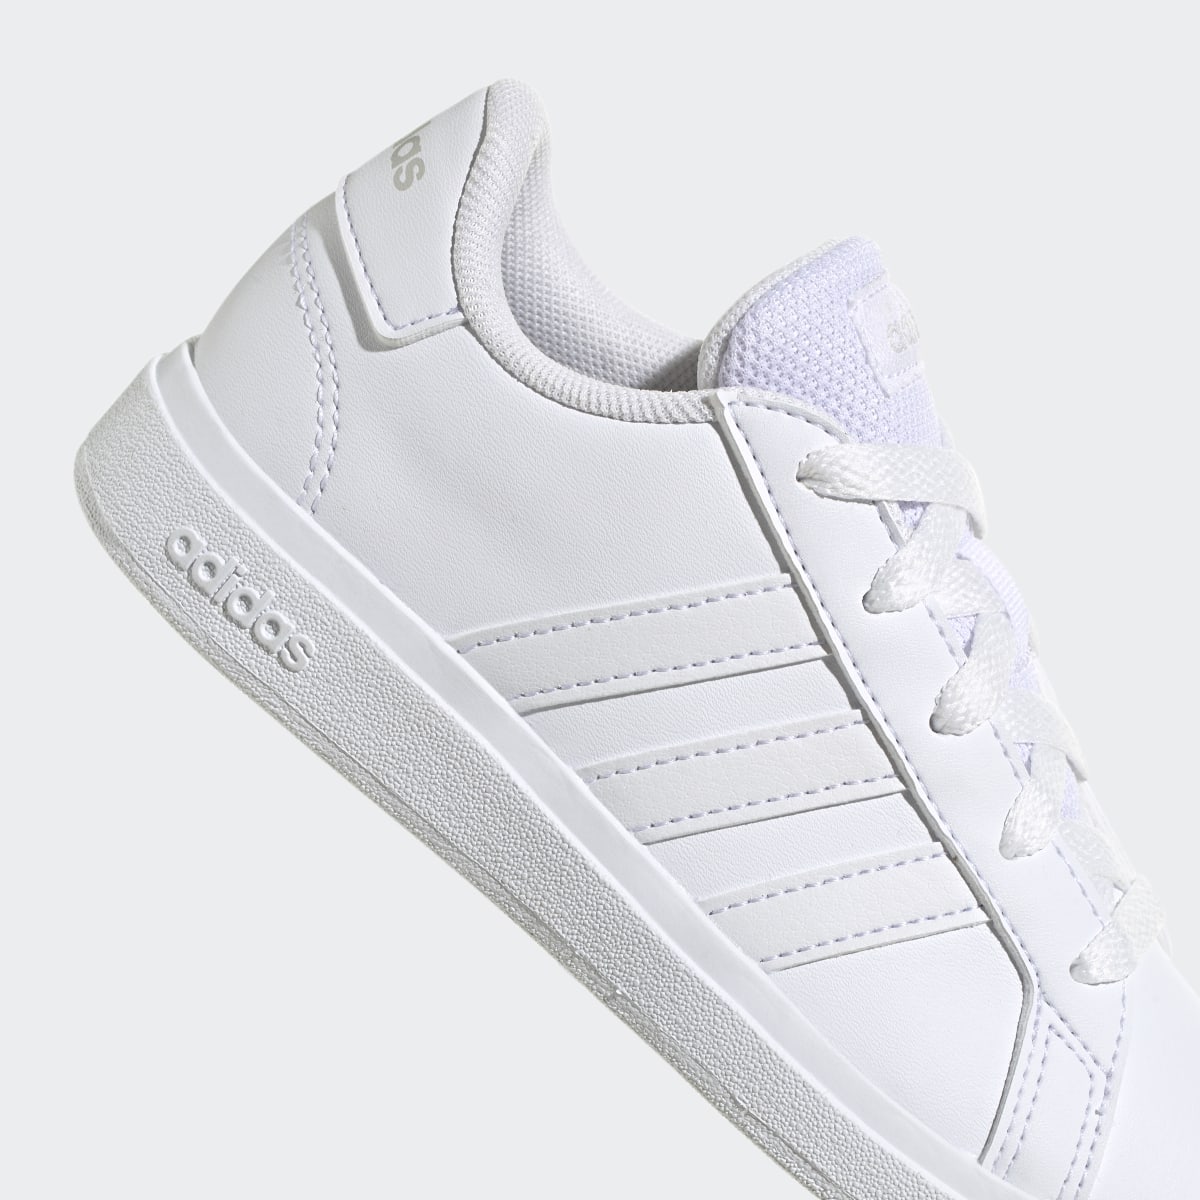 Adidas Buty Grand Court Lifestyle Tennis Lace-Up. 10